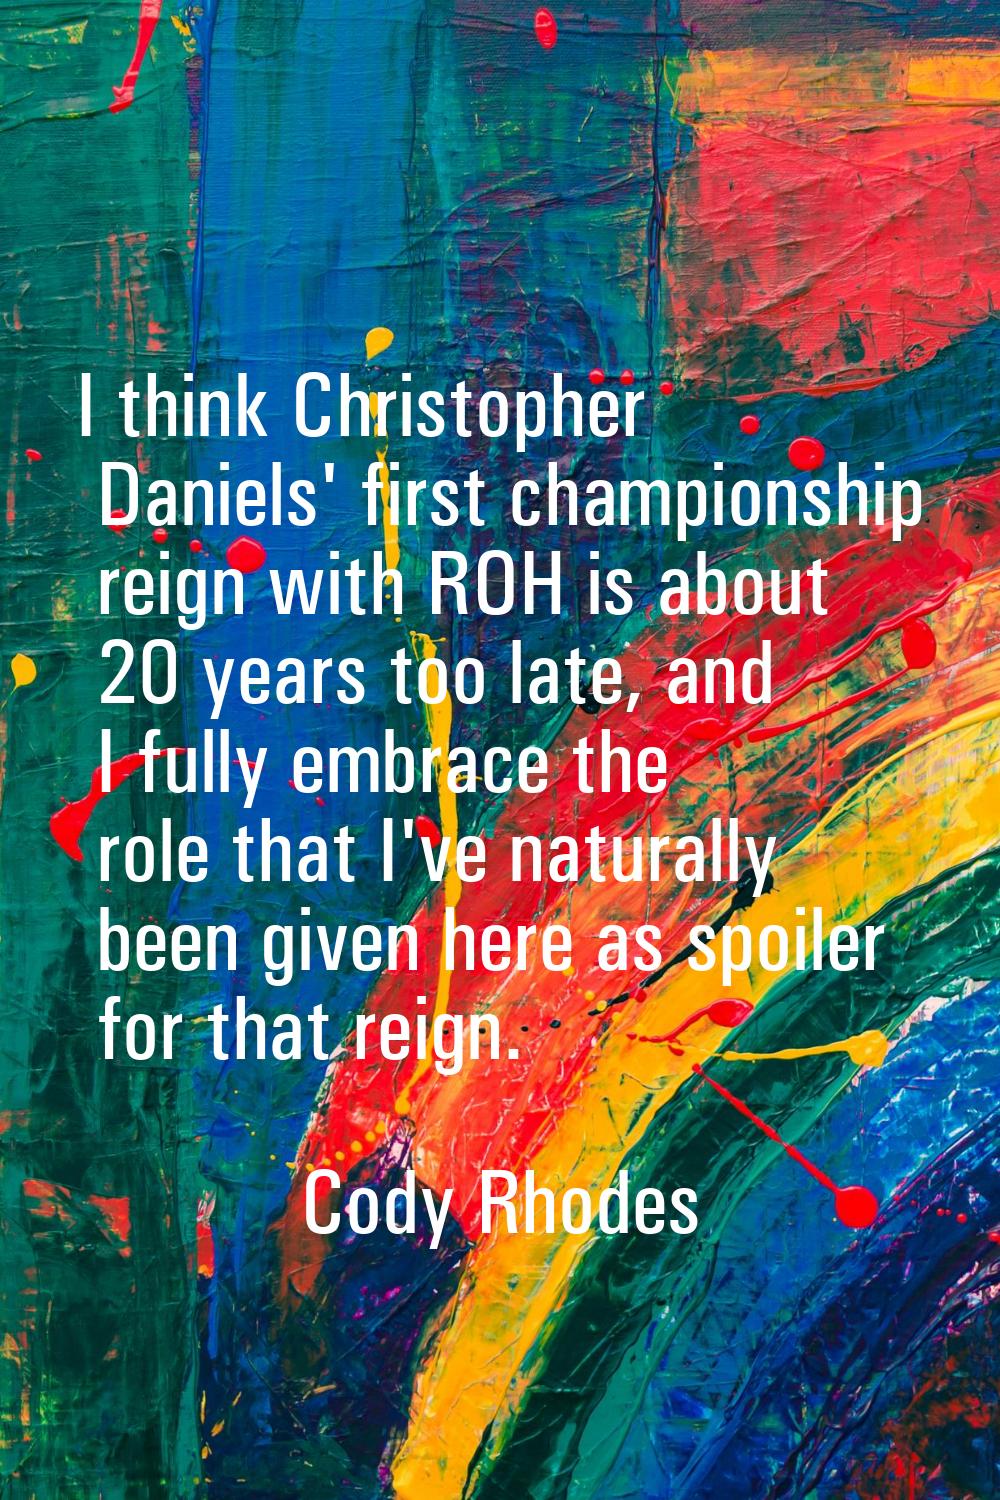 I think Christopher Daniels' first championship reign with ROH is about 20 years too late, and I fu